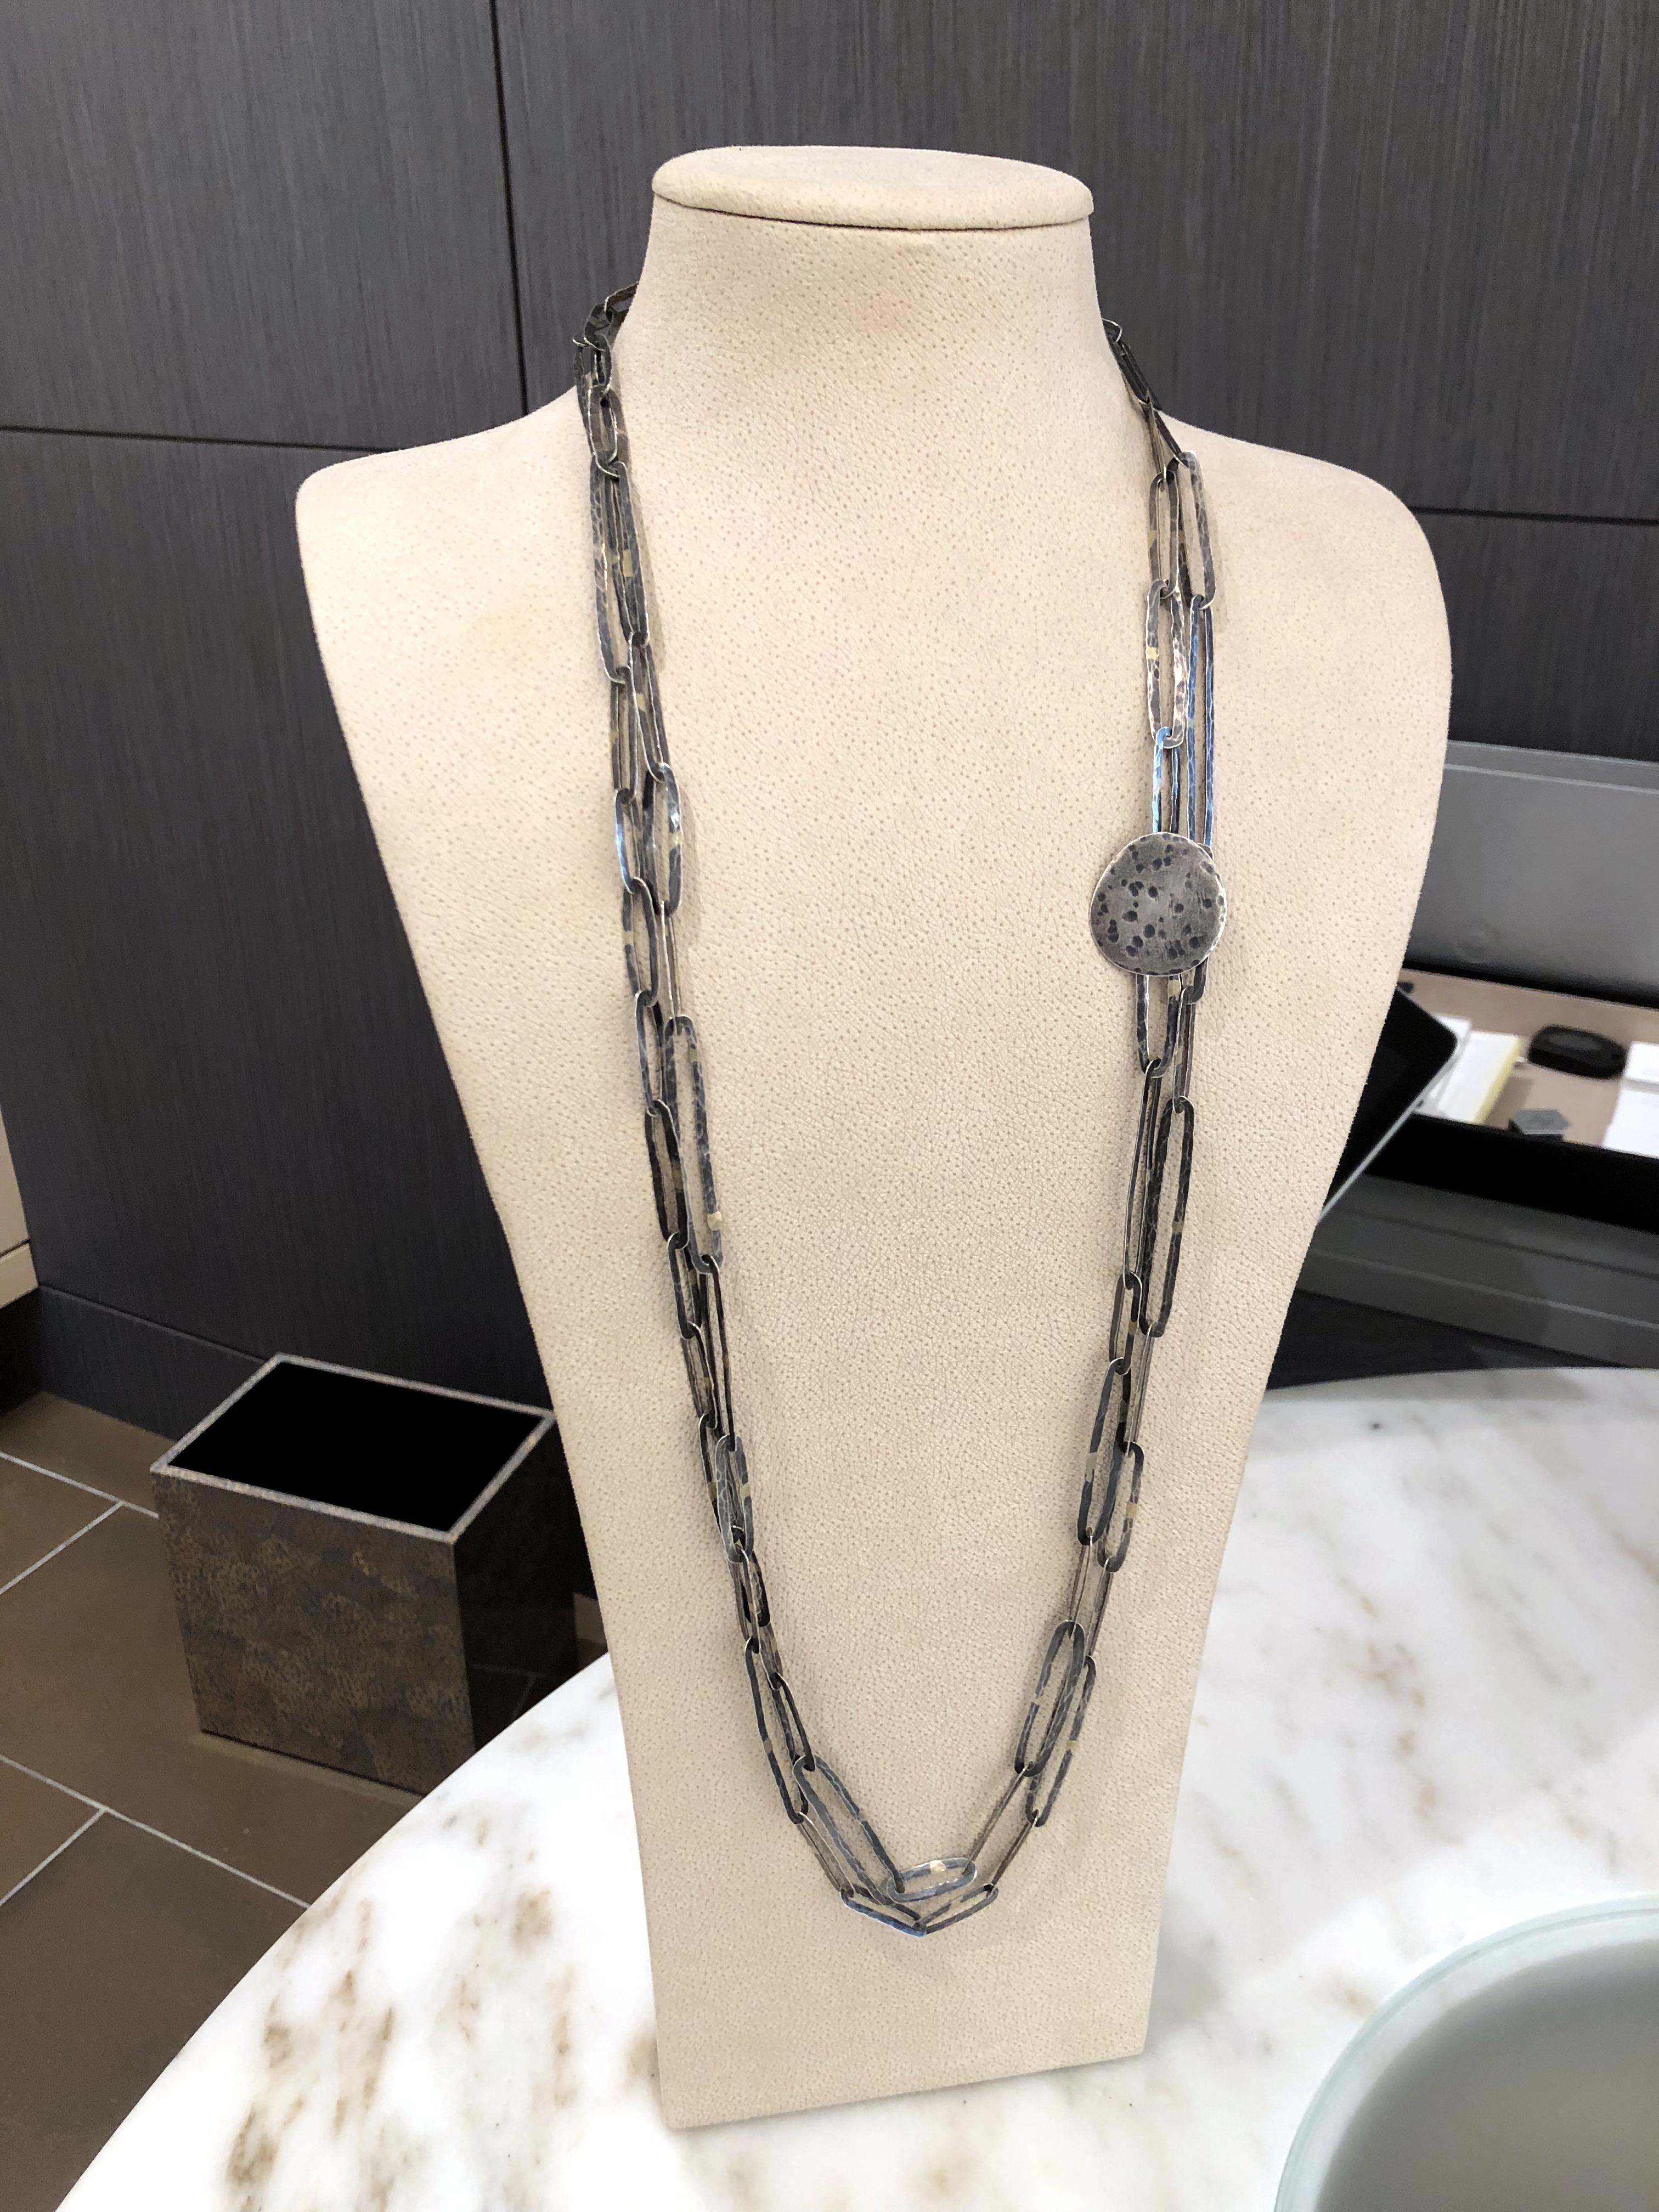 One of a Kind Extra Long Chain Link Necklace (79 inch) handcrafted by renowned jewelry artist John Iversen featuring an assortment of oxidized sterling silver and 18k yellow gold links with a dimpled button clasp. Doubled, tripled, as a lariat, a